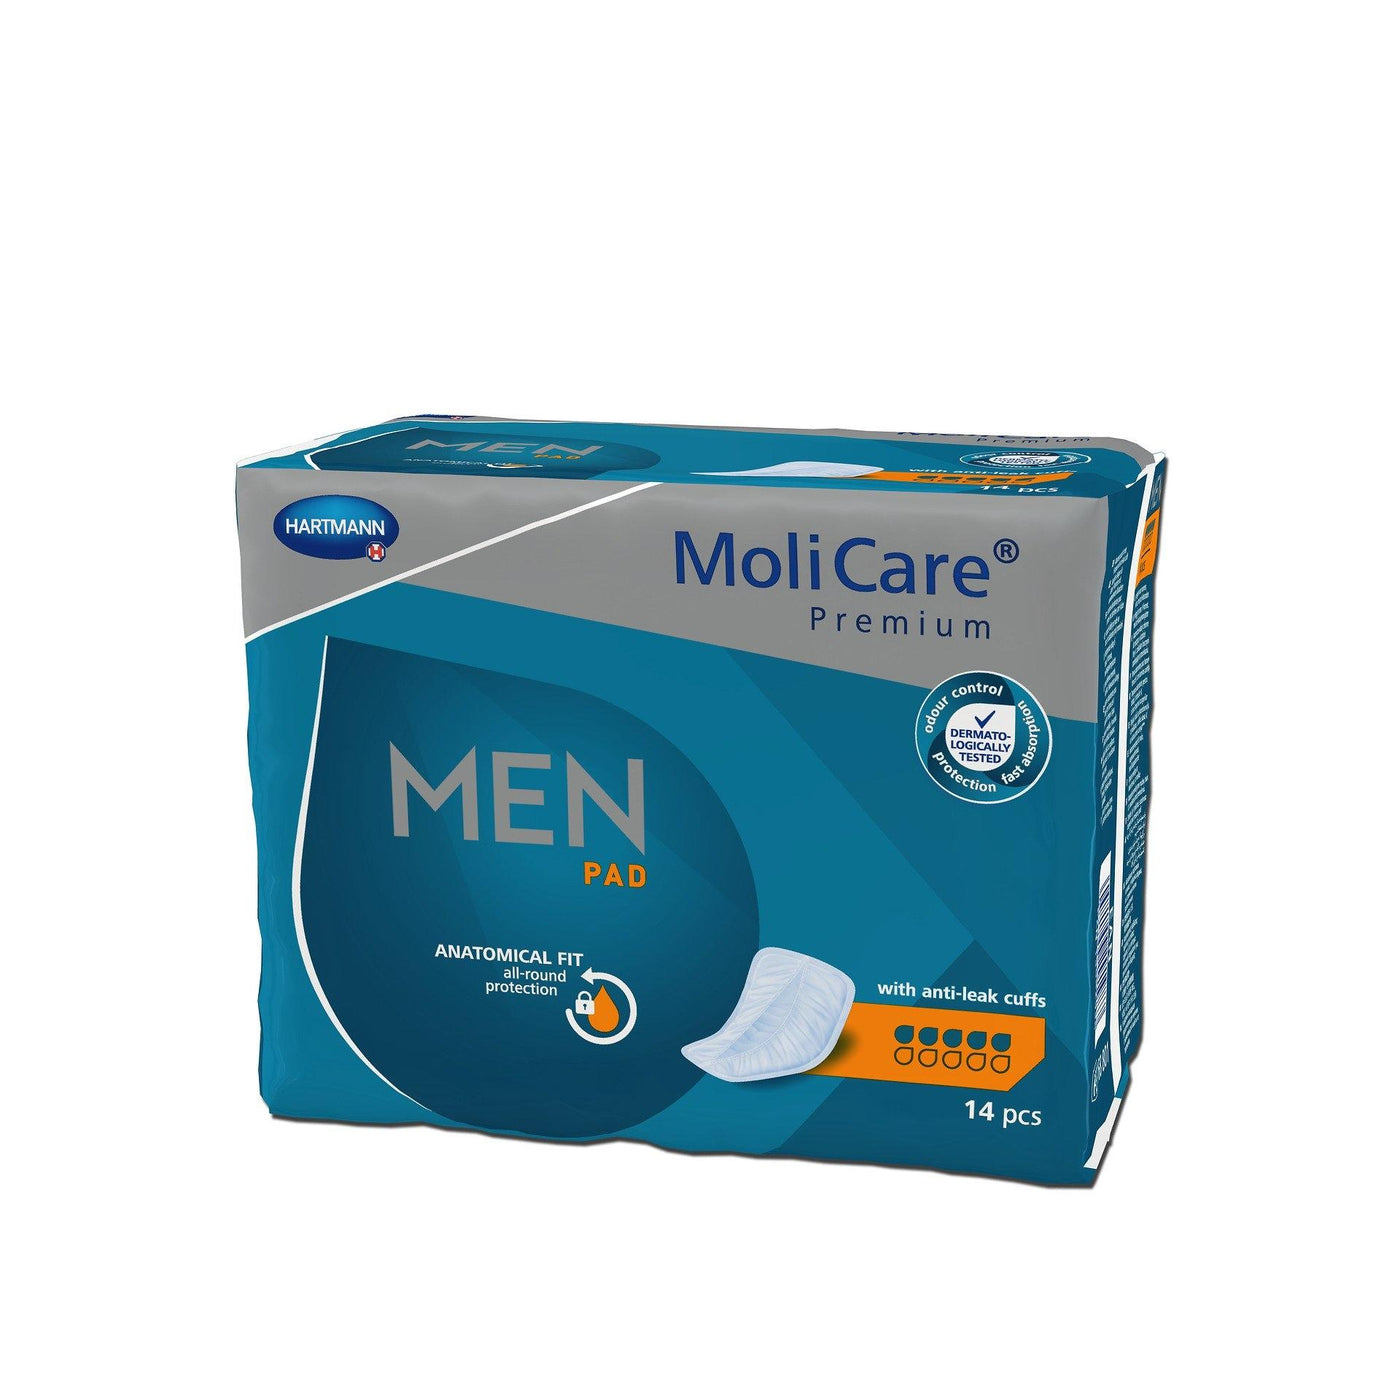 MoliCare Premium Men Pad formerly MoliMed discreet, anatomically shaped  incontinence pad